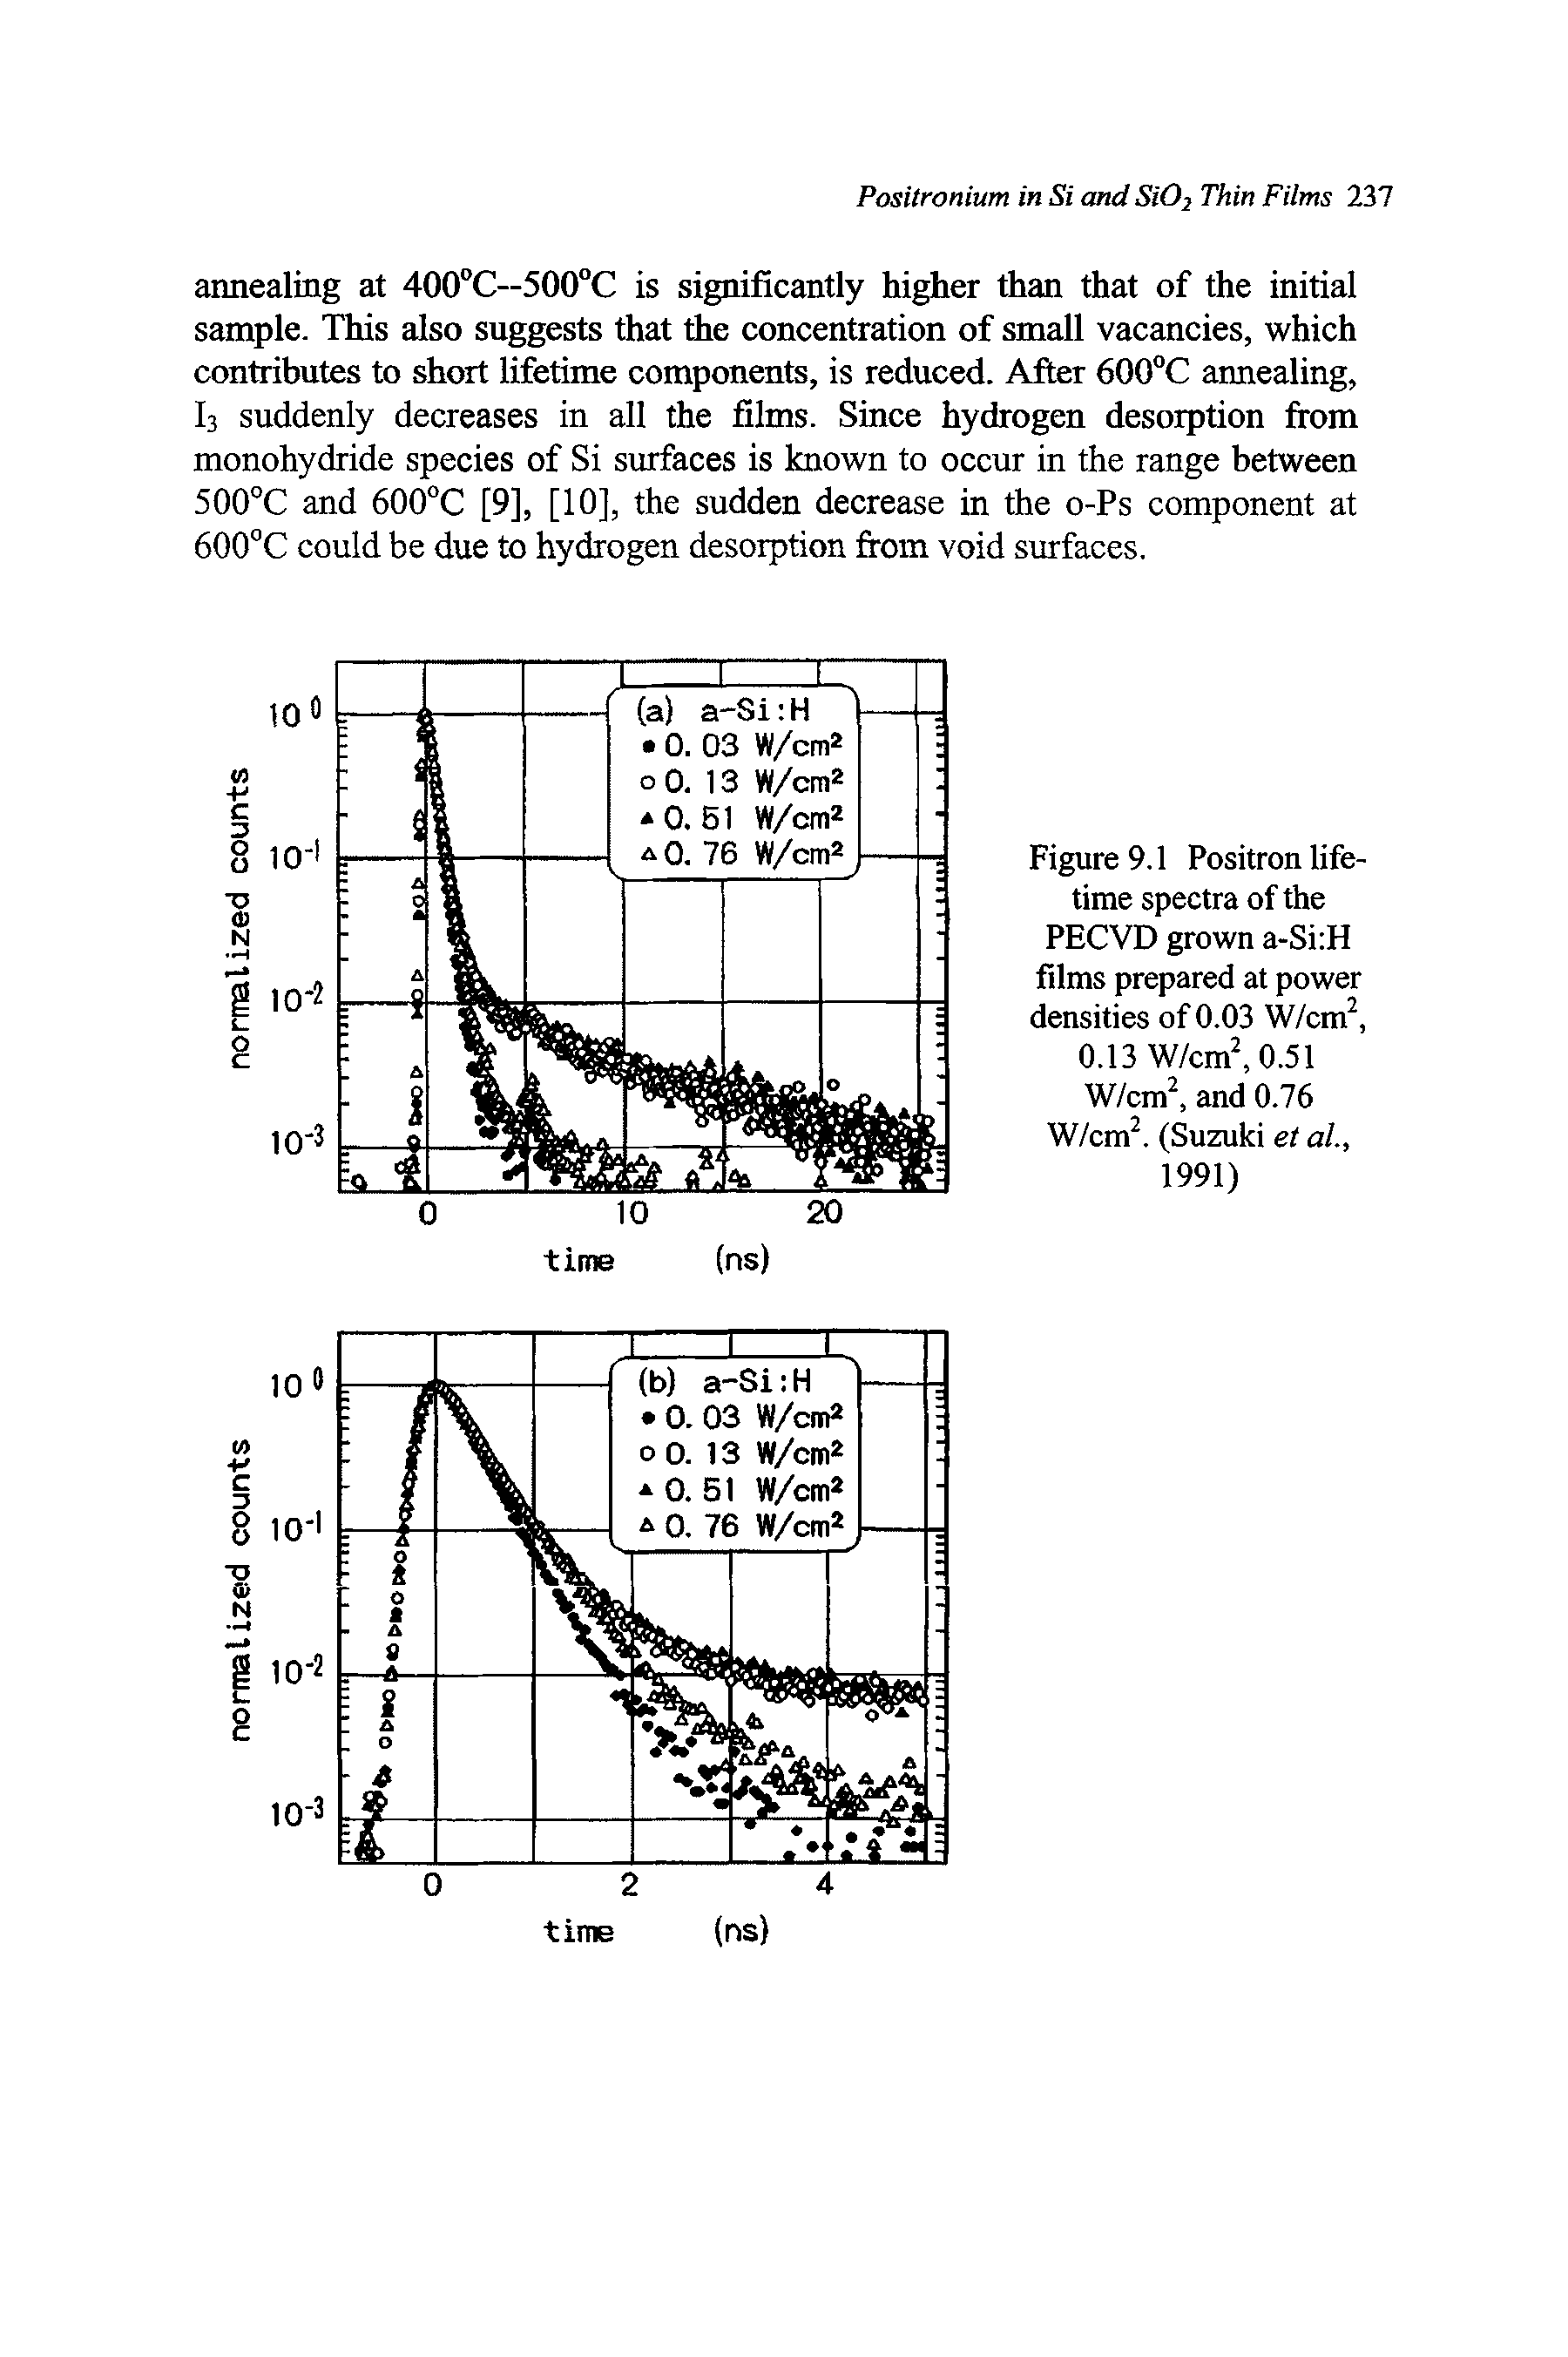 Figure 9.1 Positron lifetime spectra of the PECVD grown a-Si H films prepared at power densities of 0.03 W/cm2, 0.13 W/cm2,0.51 W/cm2, and 0.76 W/cm2. (Suzuki et a ., 1991)...